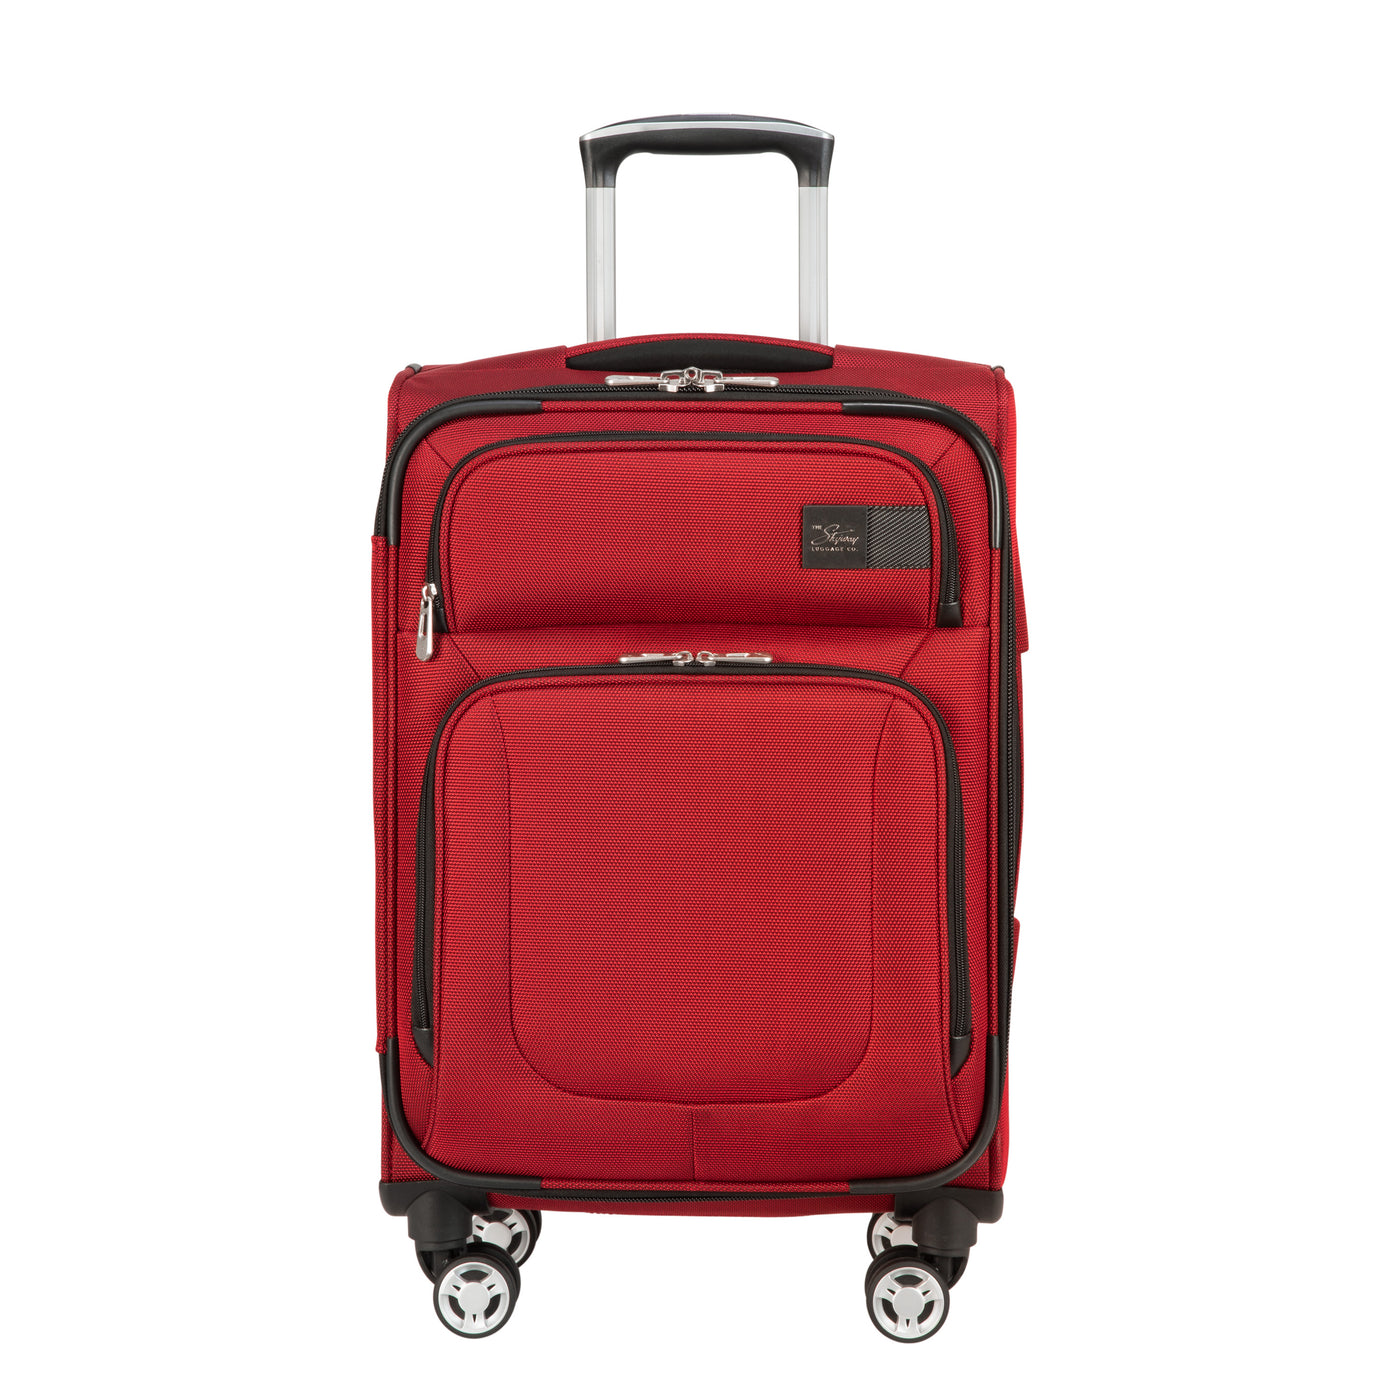 Sigma 6.0 Softside Carry-On Expandable Spinner